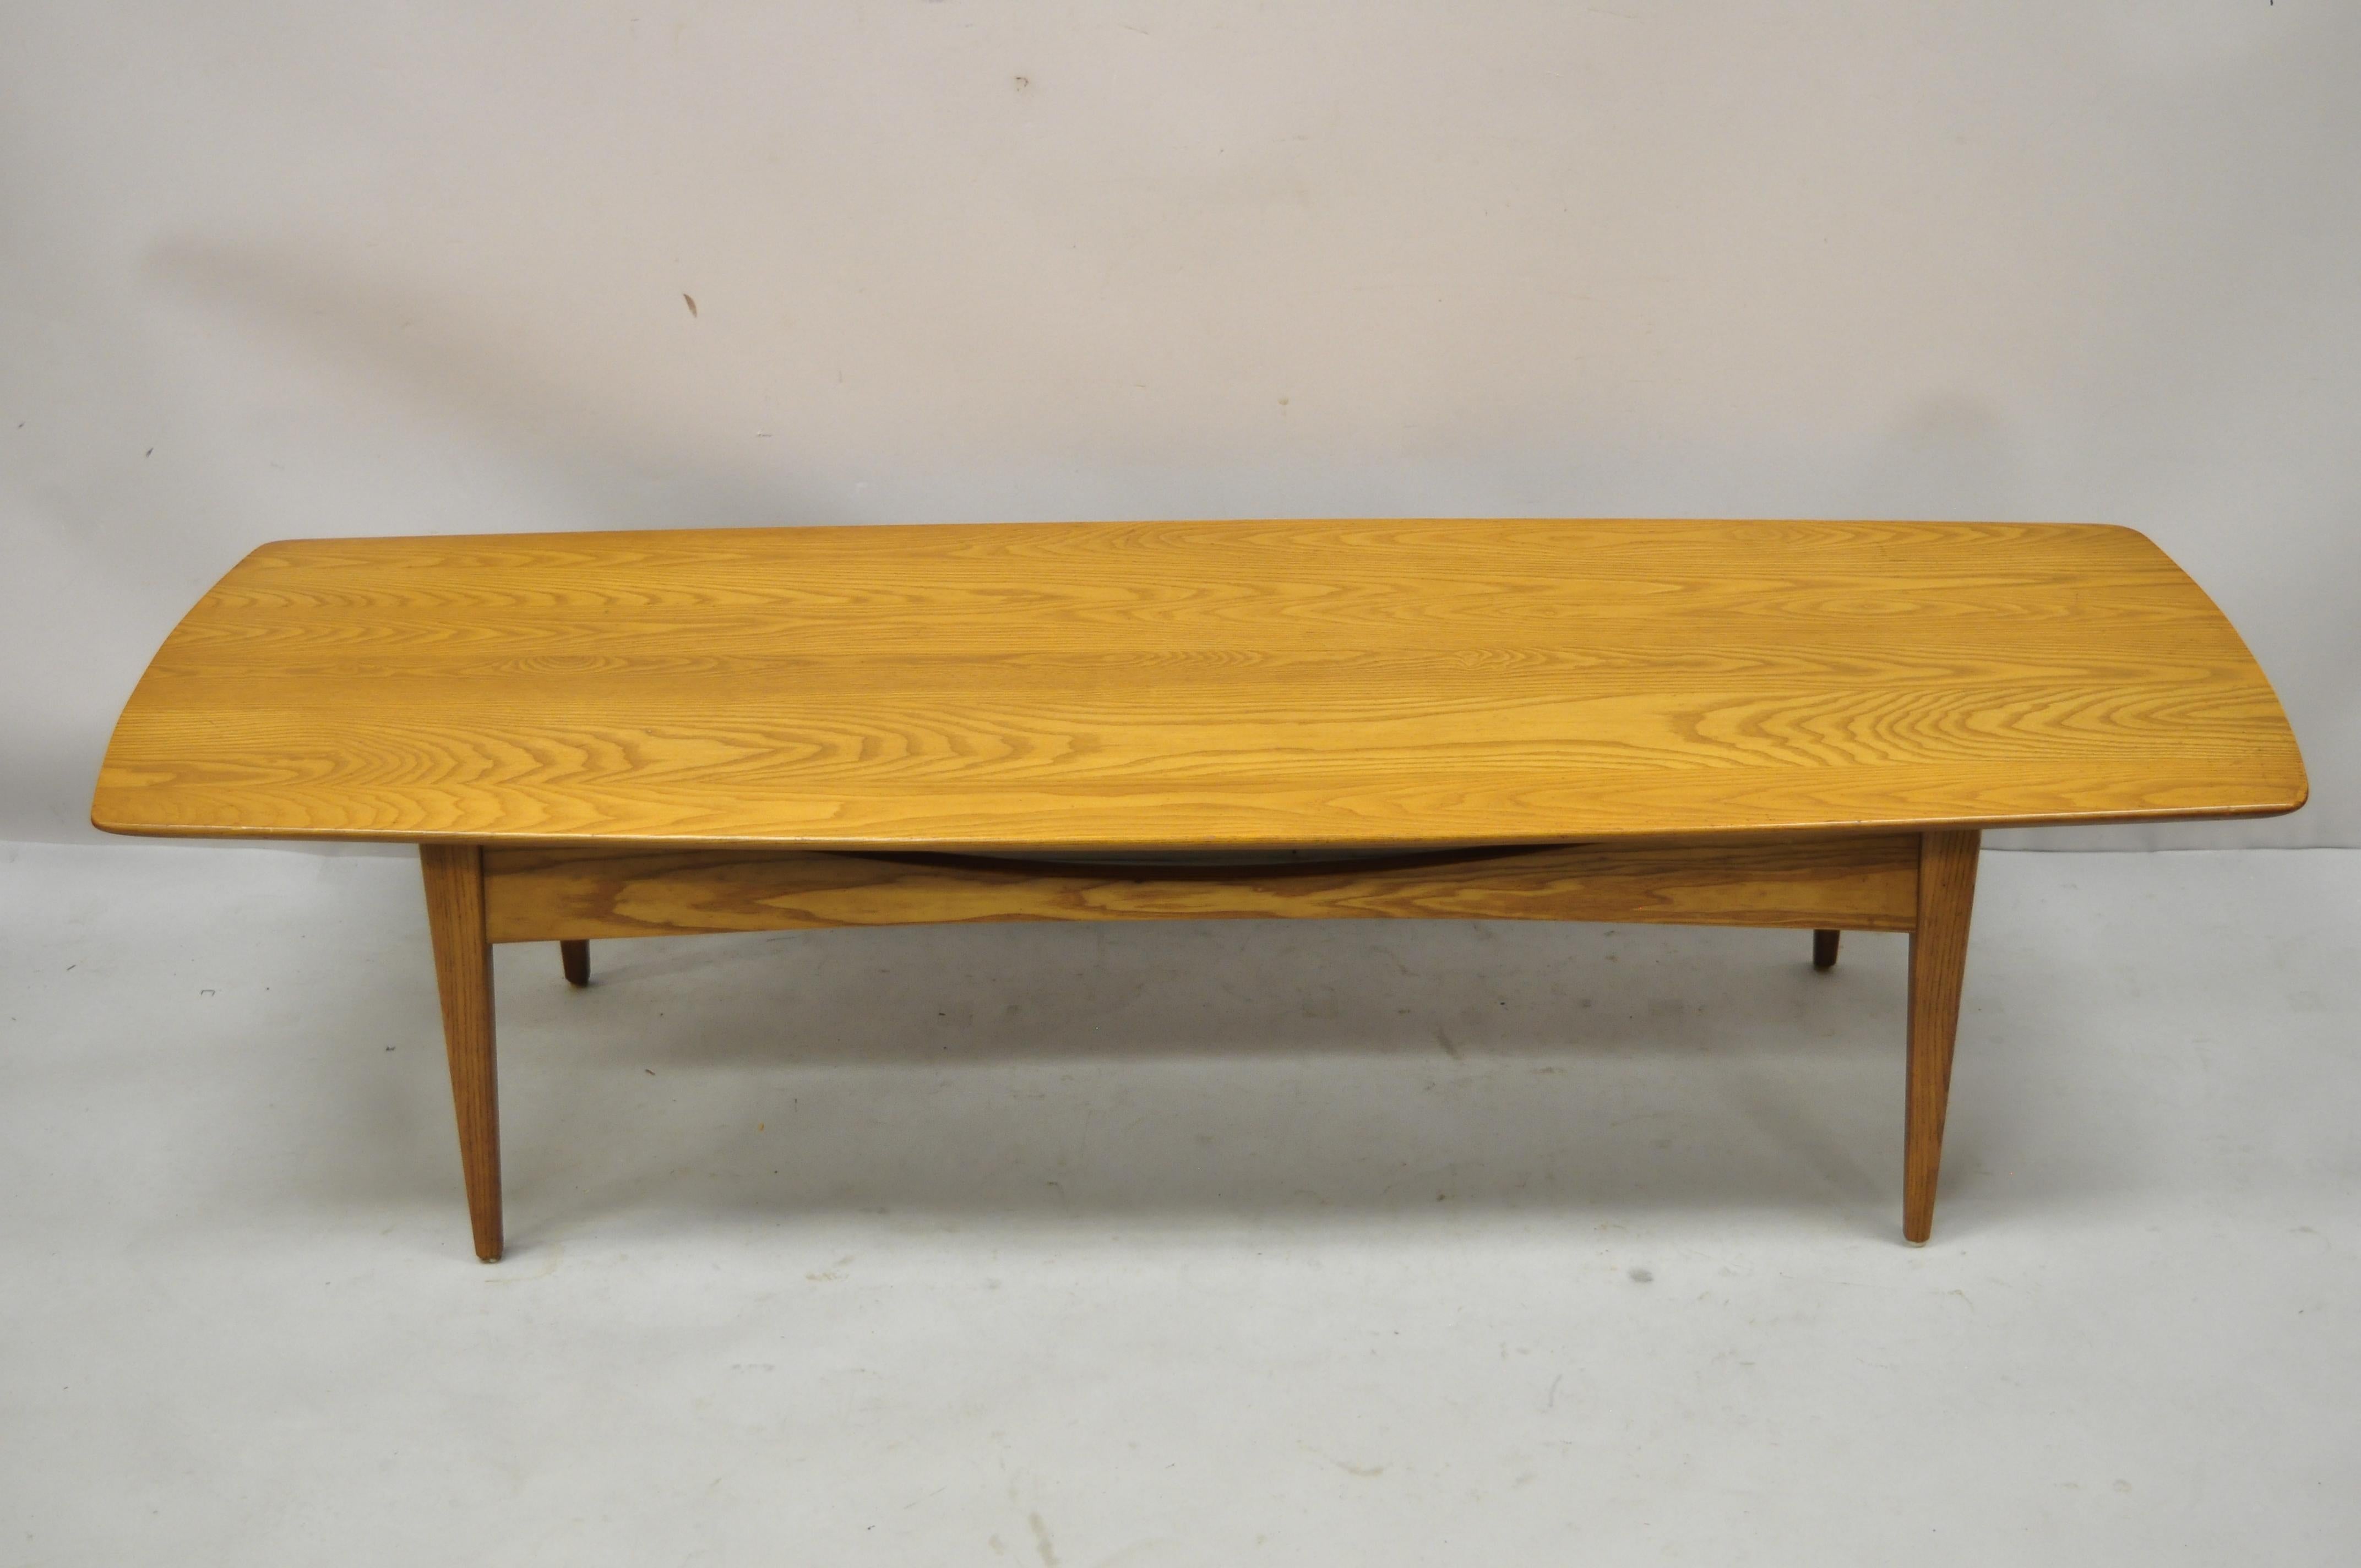 Vintage Mid-Century Modern teak wood long surfboard coffee table. Marked 701-G. Item features beautiful wood grain, tapered legs, clean modernist lines, quality American craftsmanship, great style and form, Circa mid 20th century. Measurements: